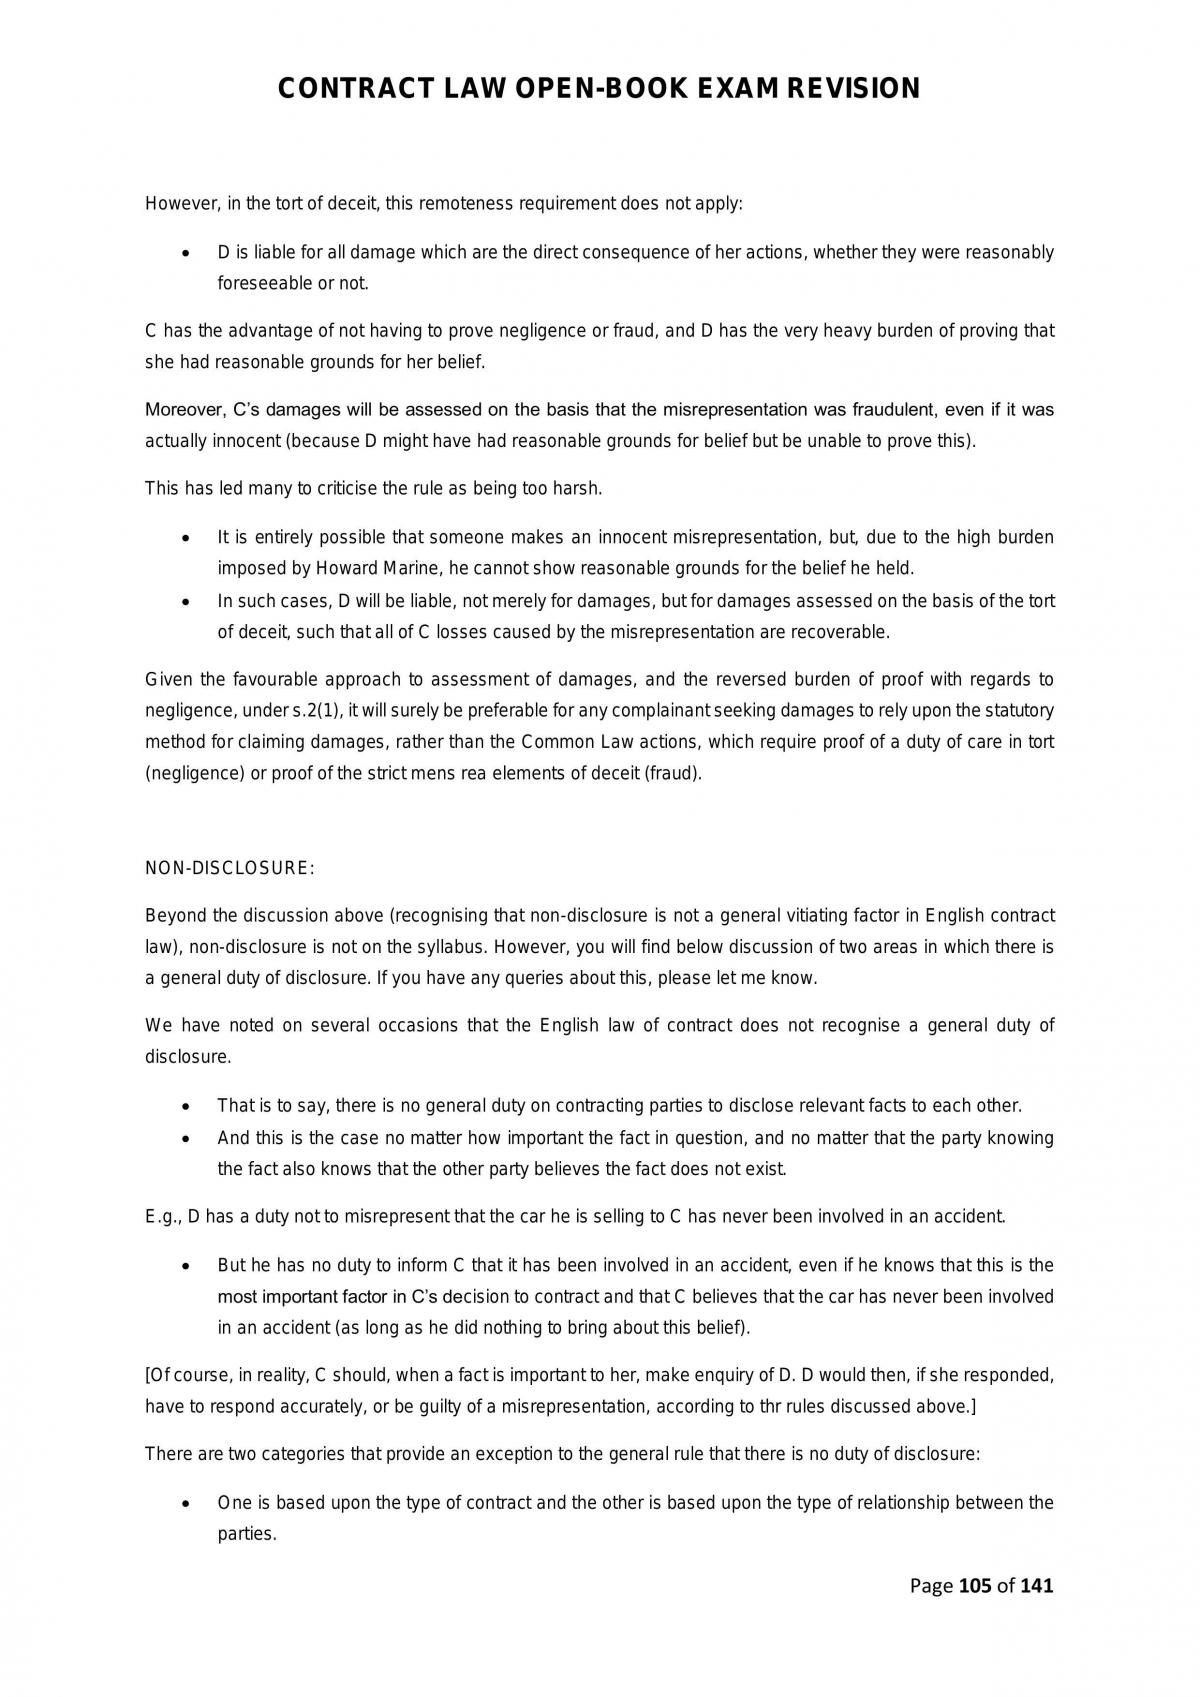 Contract Law Module Notes - Page 105